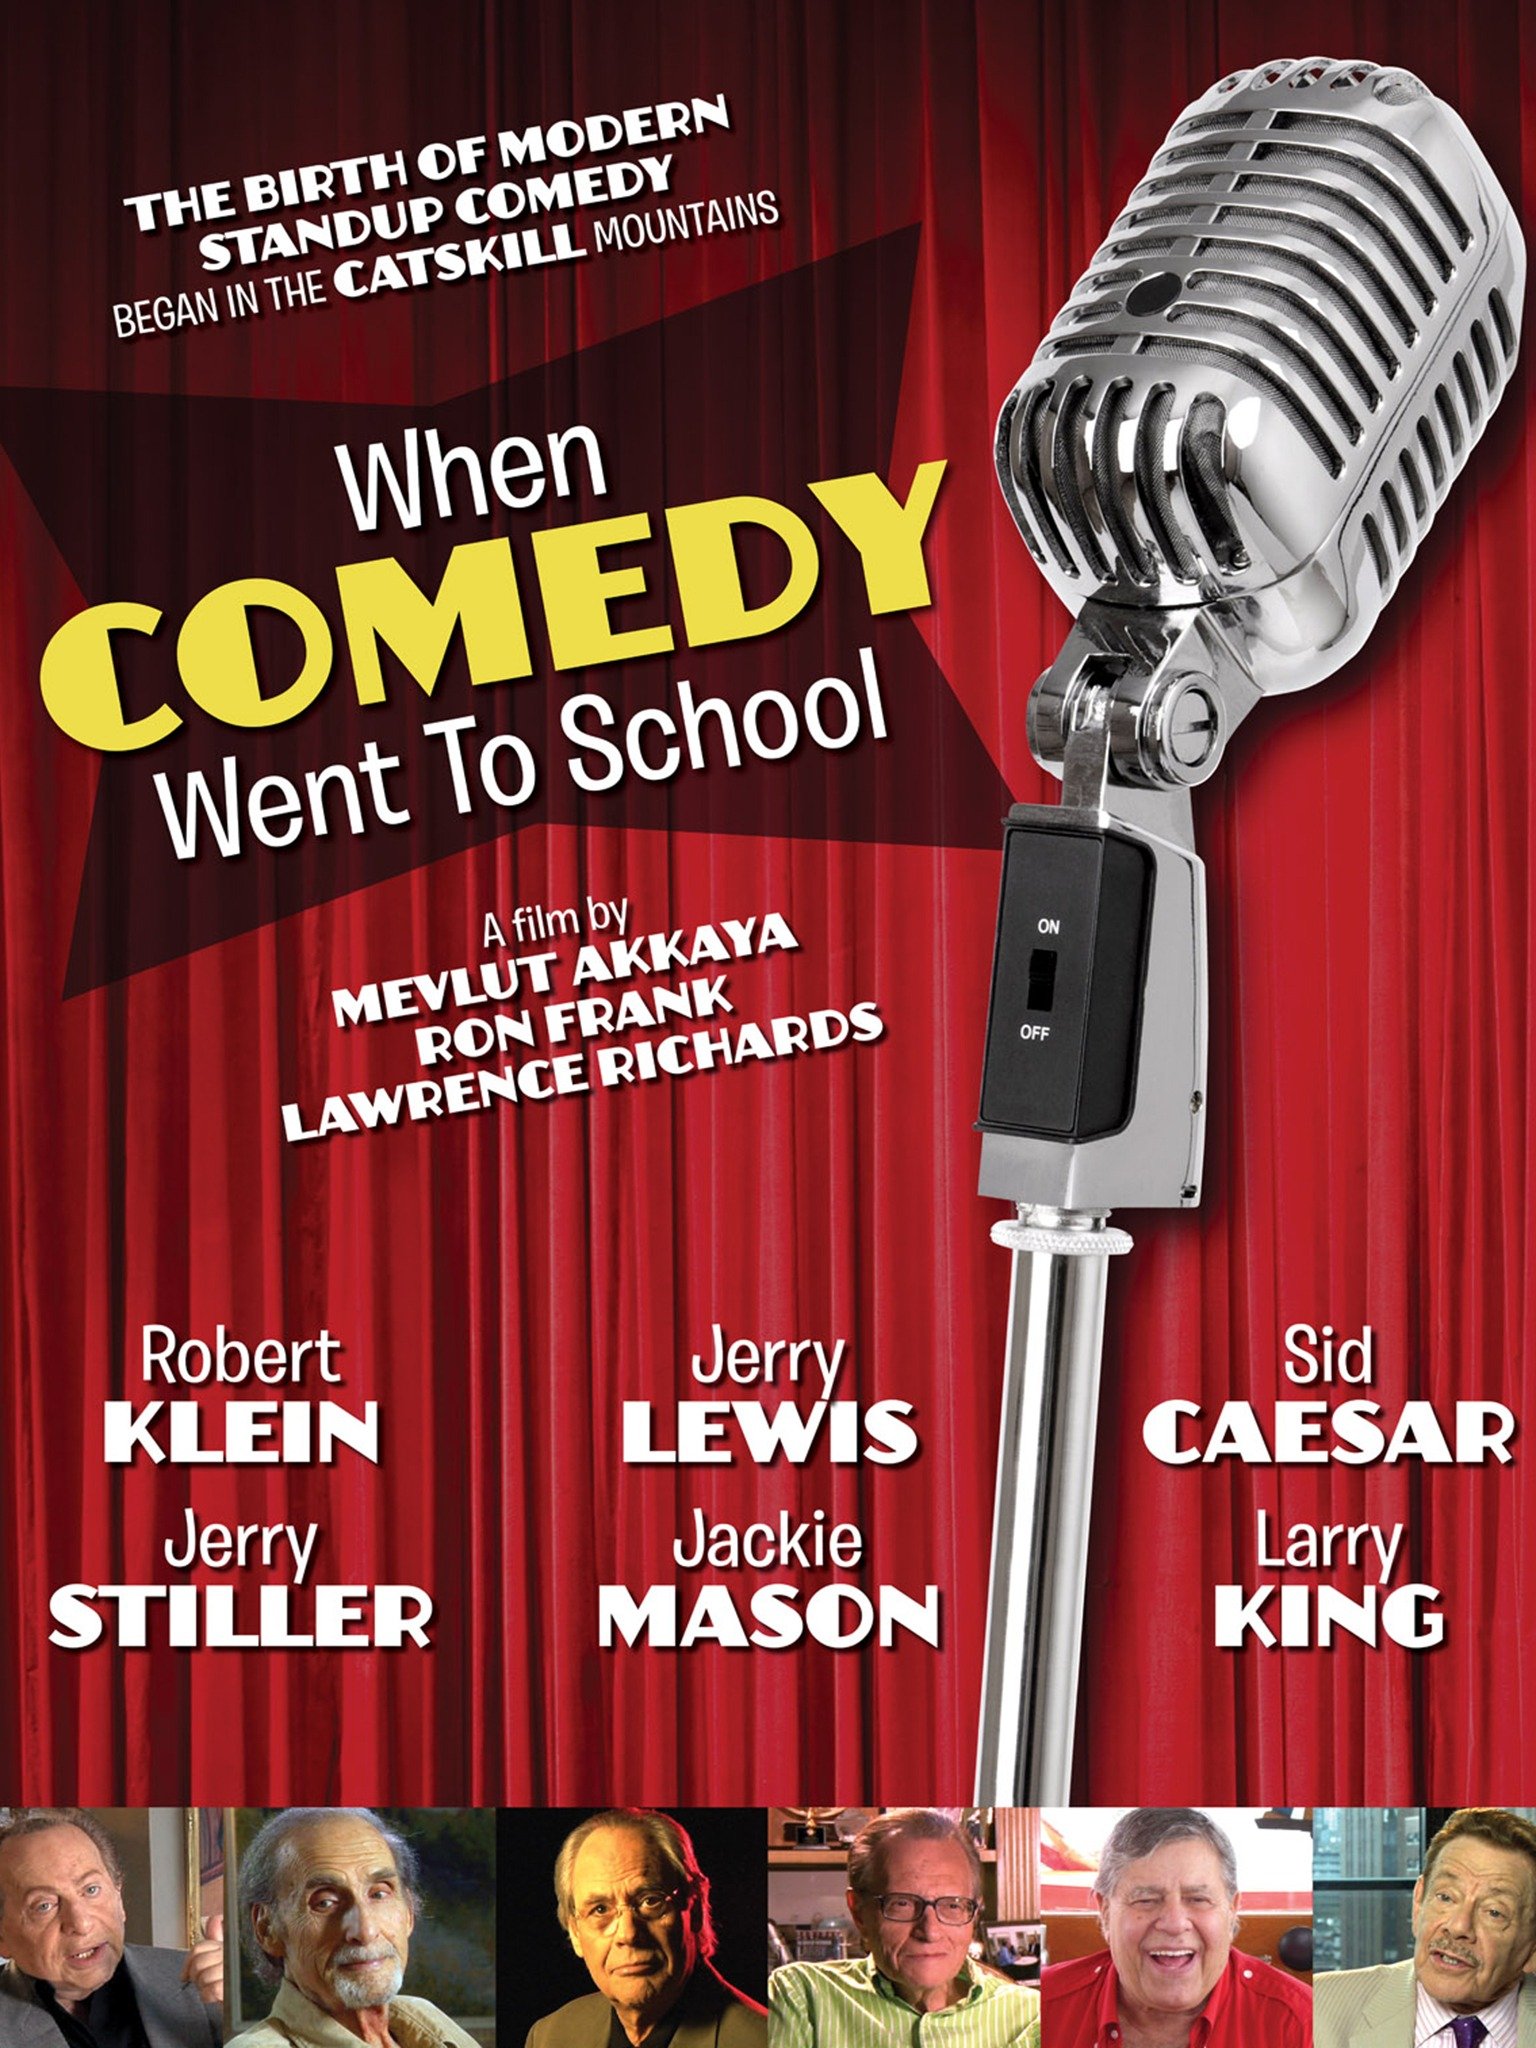 When Comedy Went to School image photo